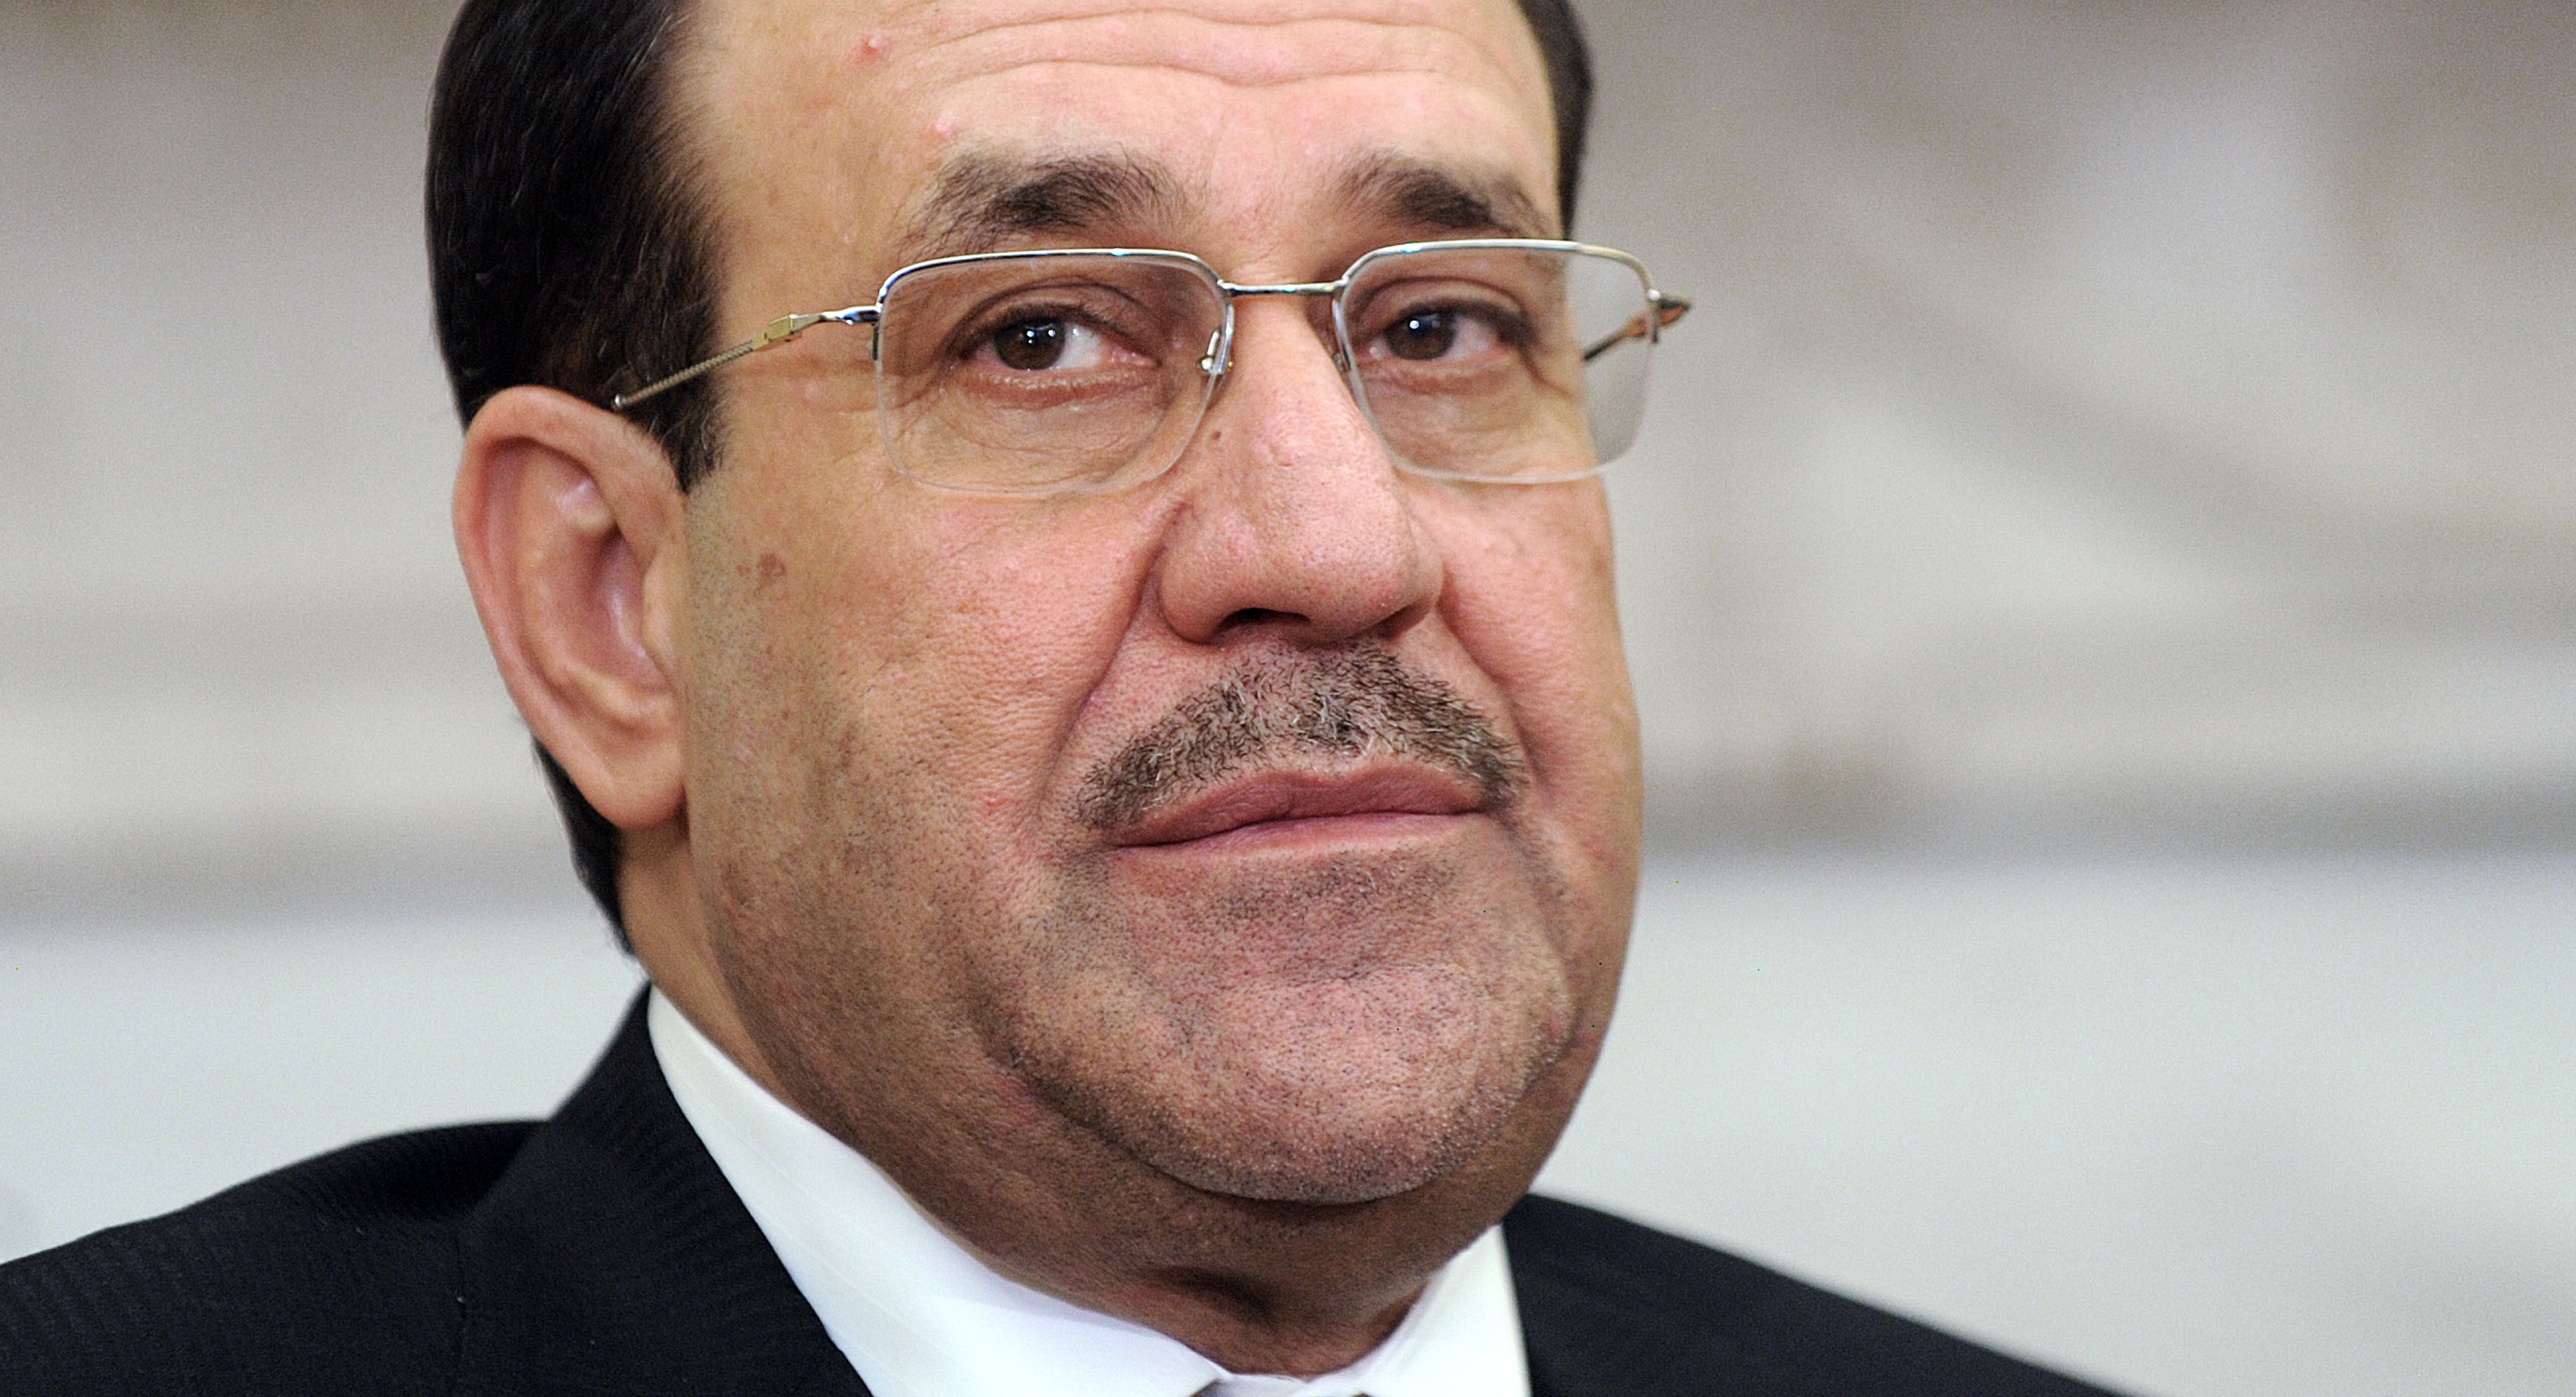 Iraqi Prime Minister Nouri al-Maliki speaks during a meeting with U.S. President Barack Obama at the White House, in Washington, on Nov. 1, 2013 (Getty Images--Olivier Douliery)